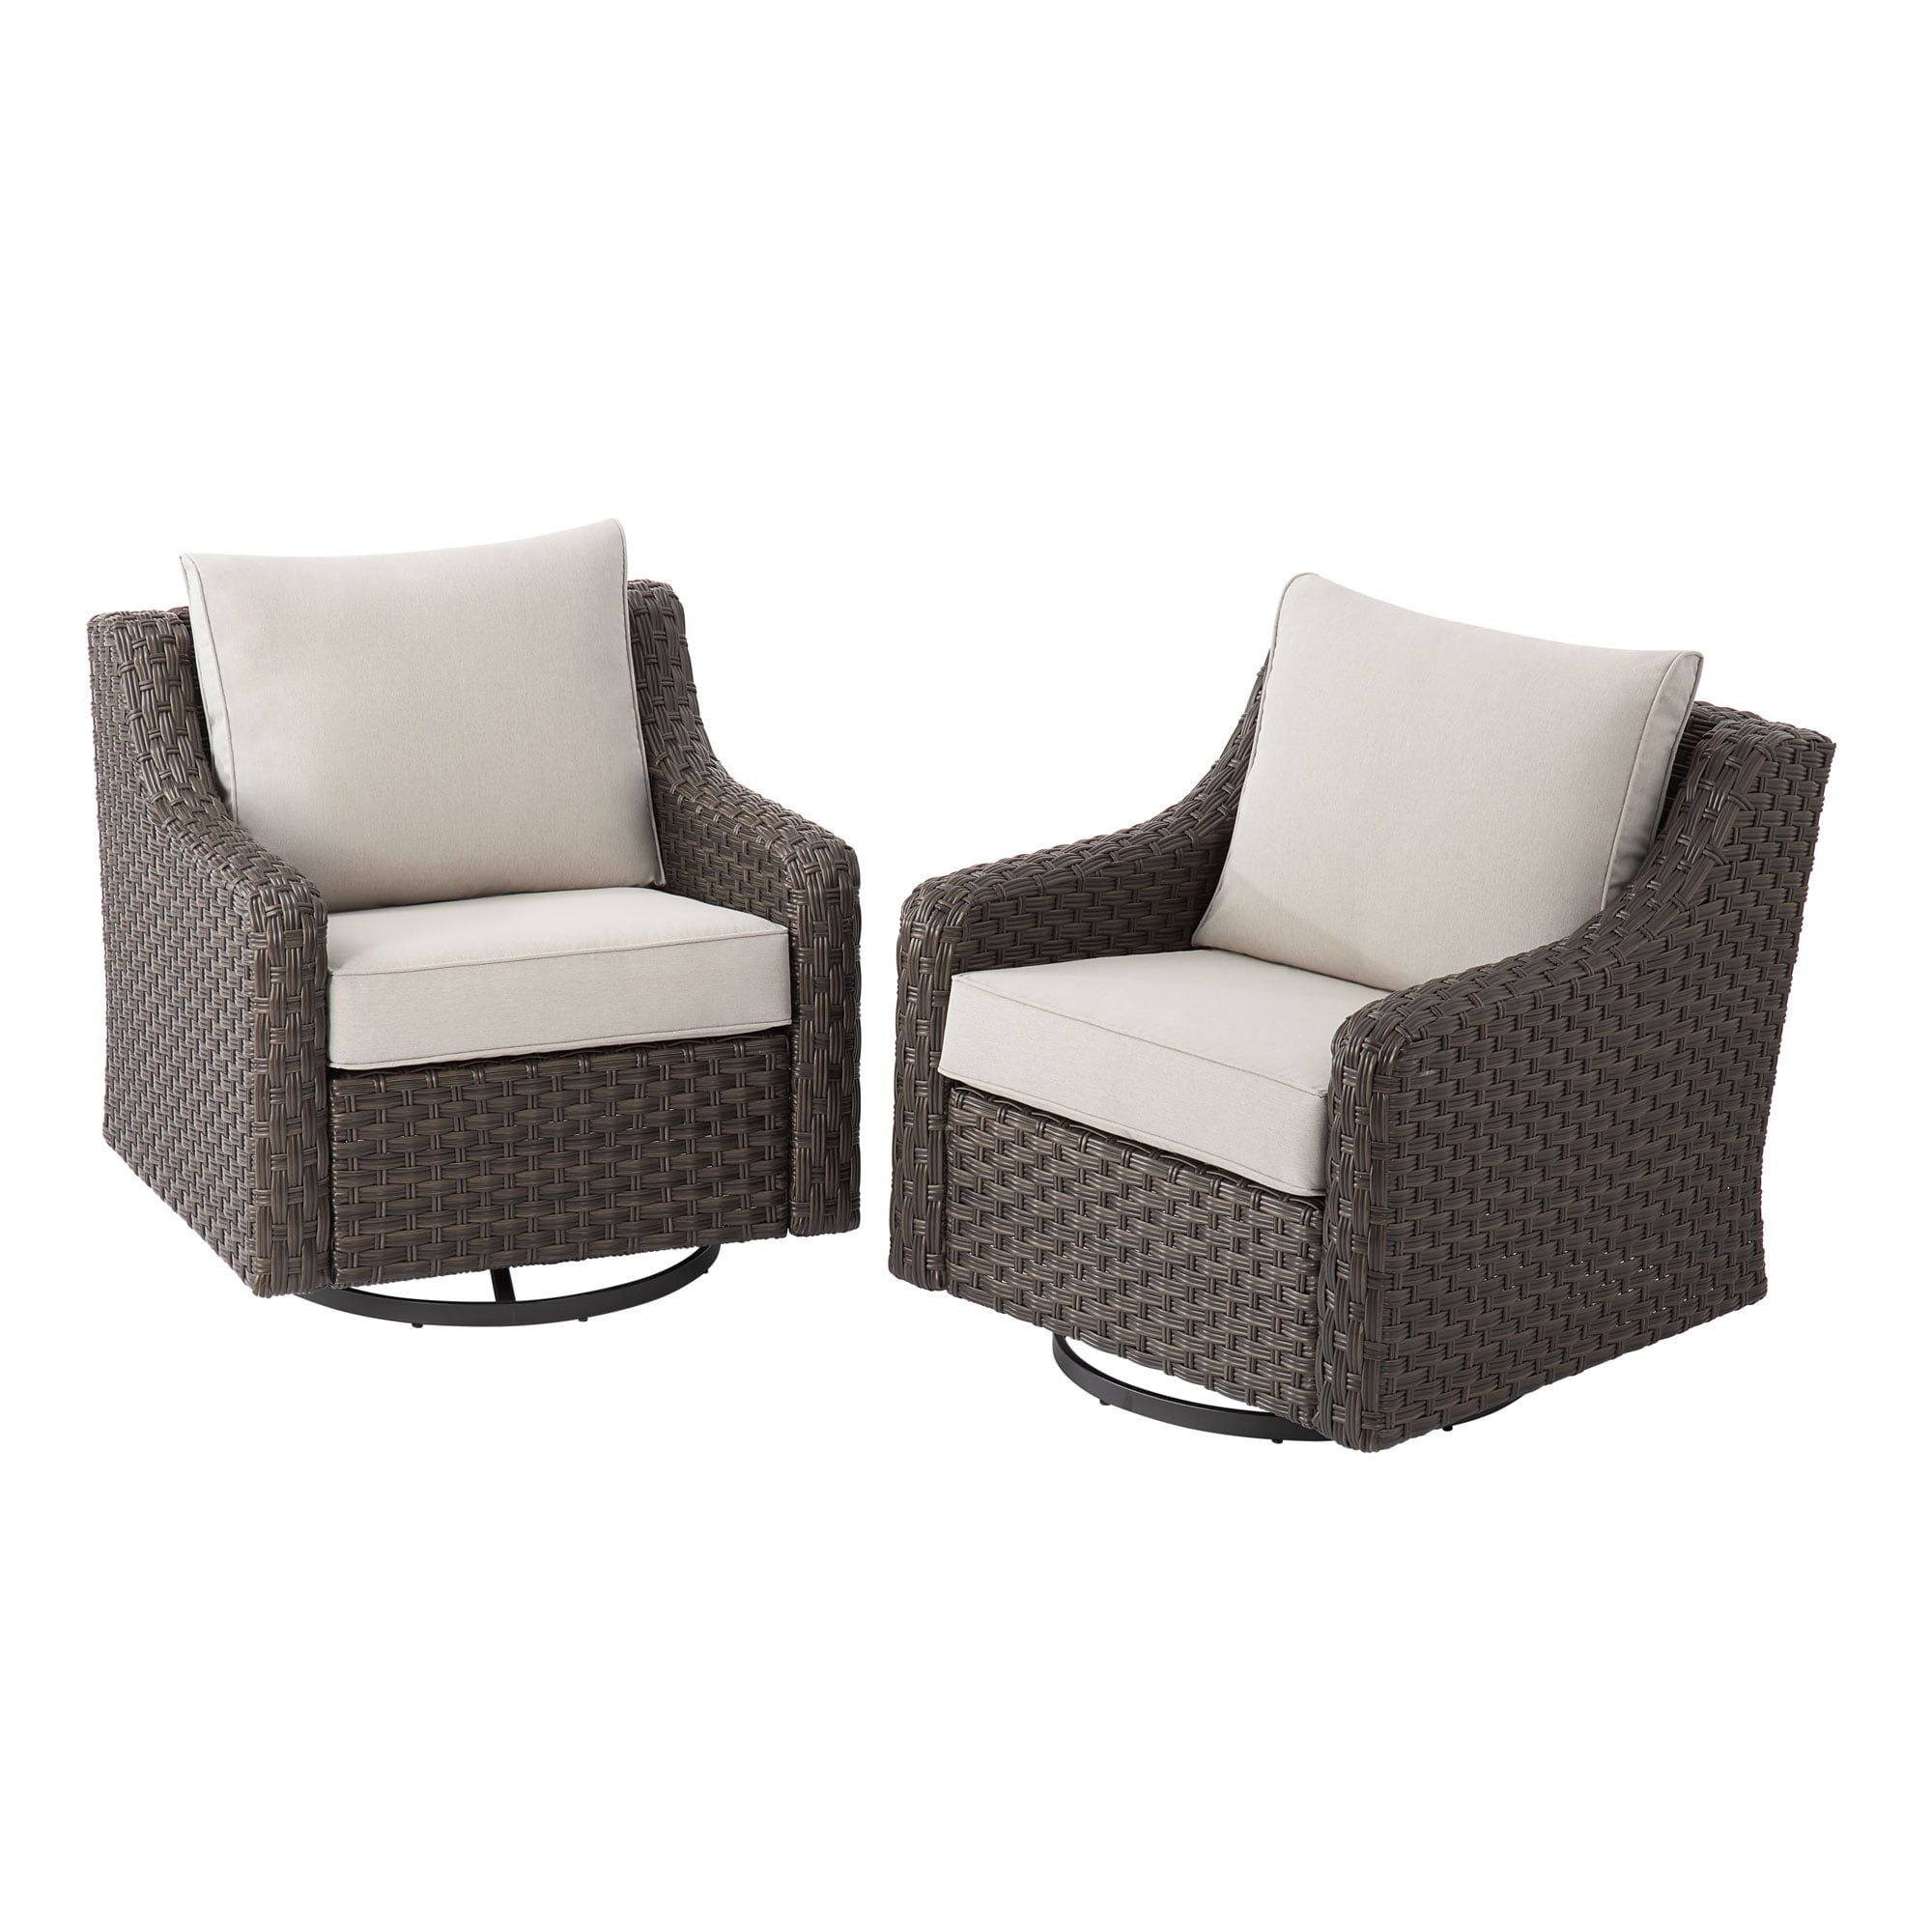 Better Homes & Gardens River Oaks 2 Piece Wicker Swivel Glider With Patio  Covers, Dark – Walmart With Regard To 2 Piece Swivel Gliders With Patio Cover (View 6 of 15)